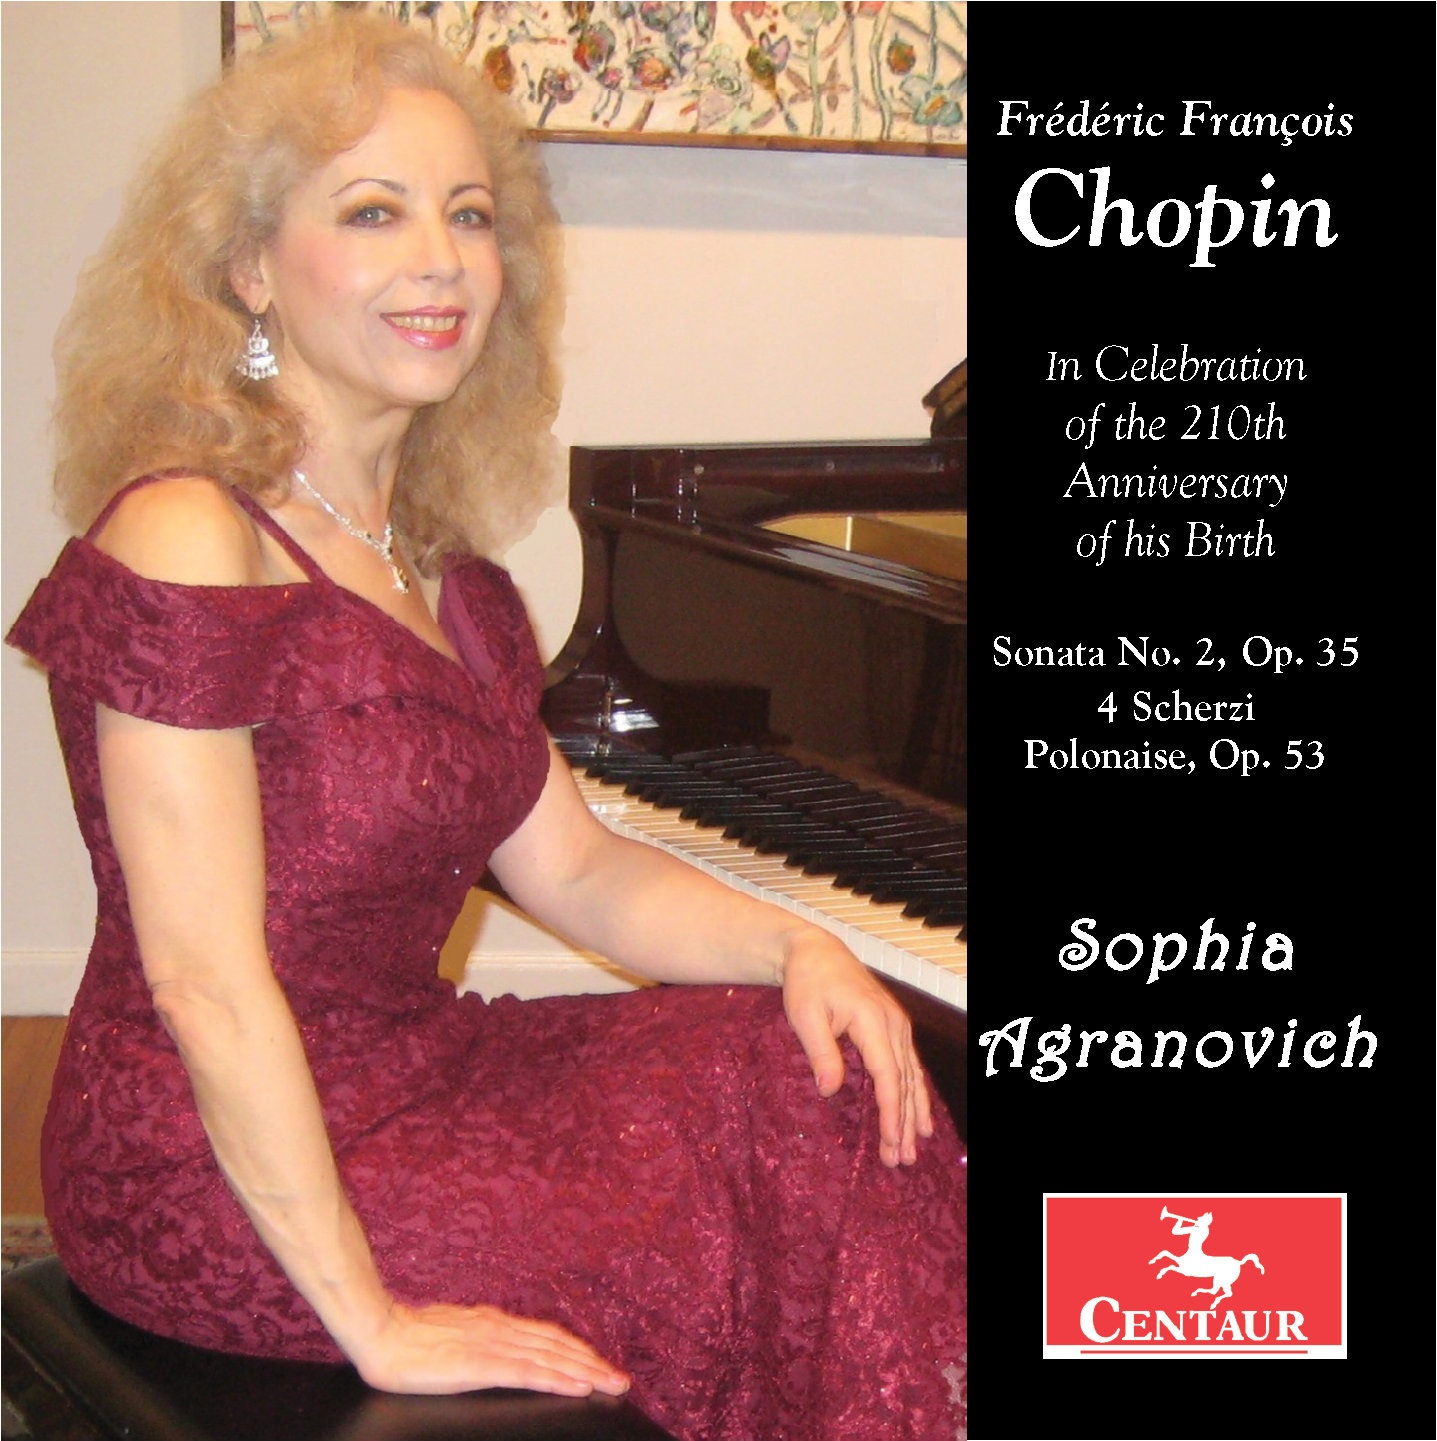 CD Album 'Frédéric François Chopin: In Celebration of the 210th Anniversary'